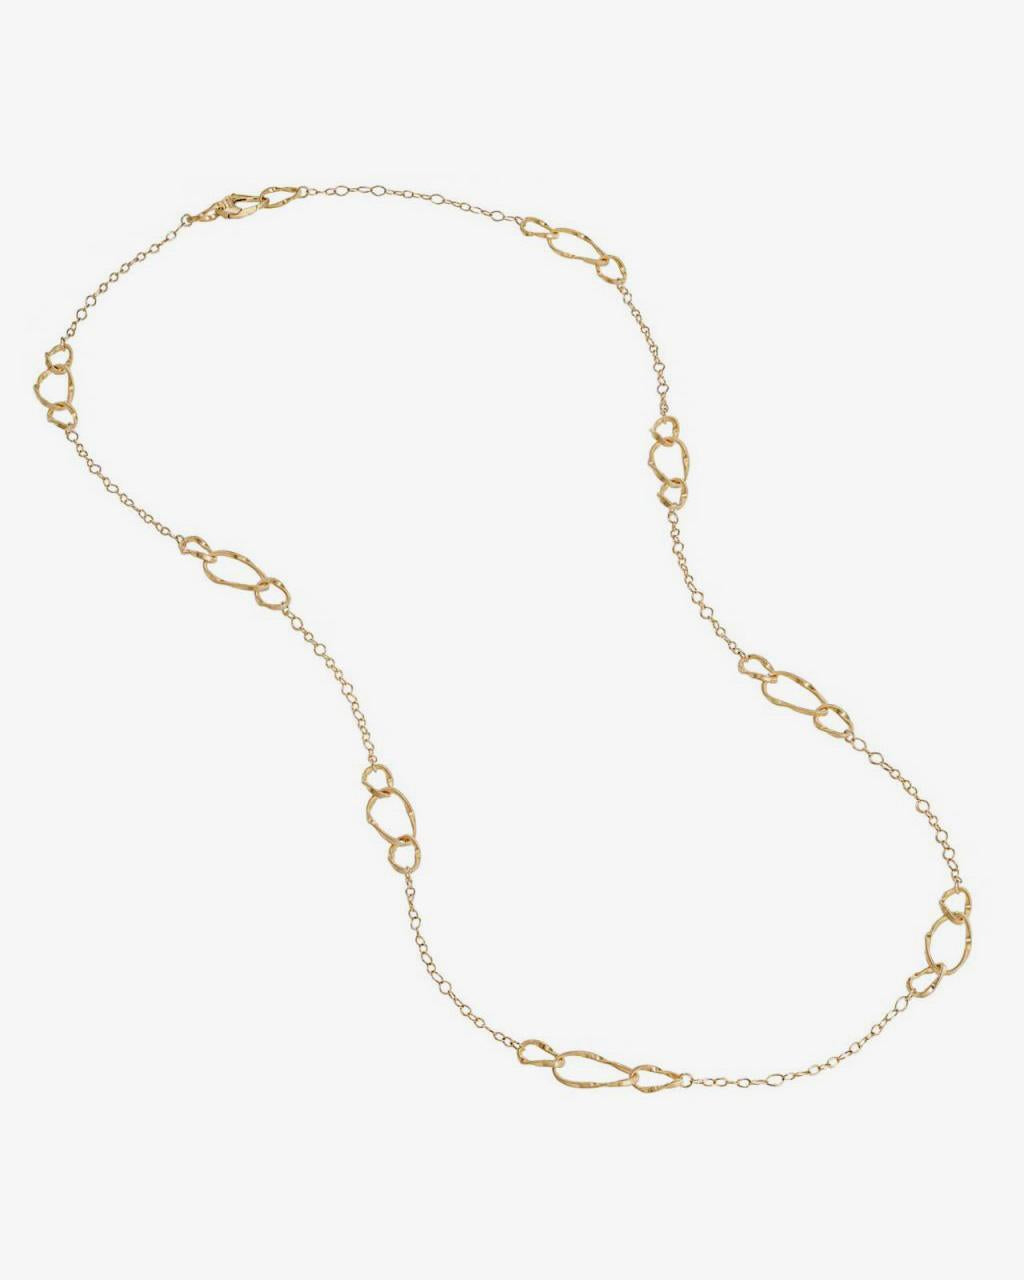 Marco Bicego 'Marrakech Onde' Collection Twisted Oval Long Necklace